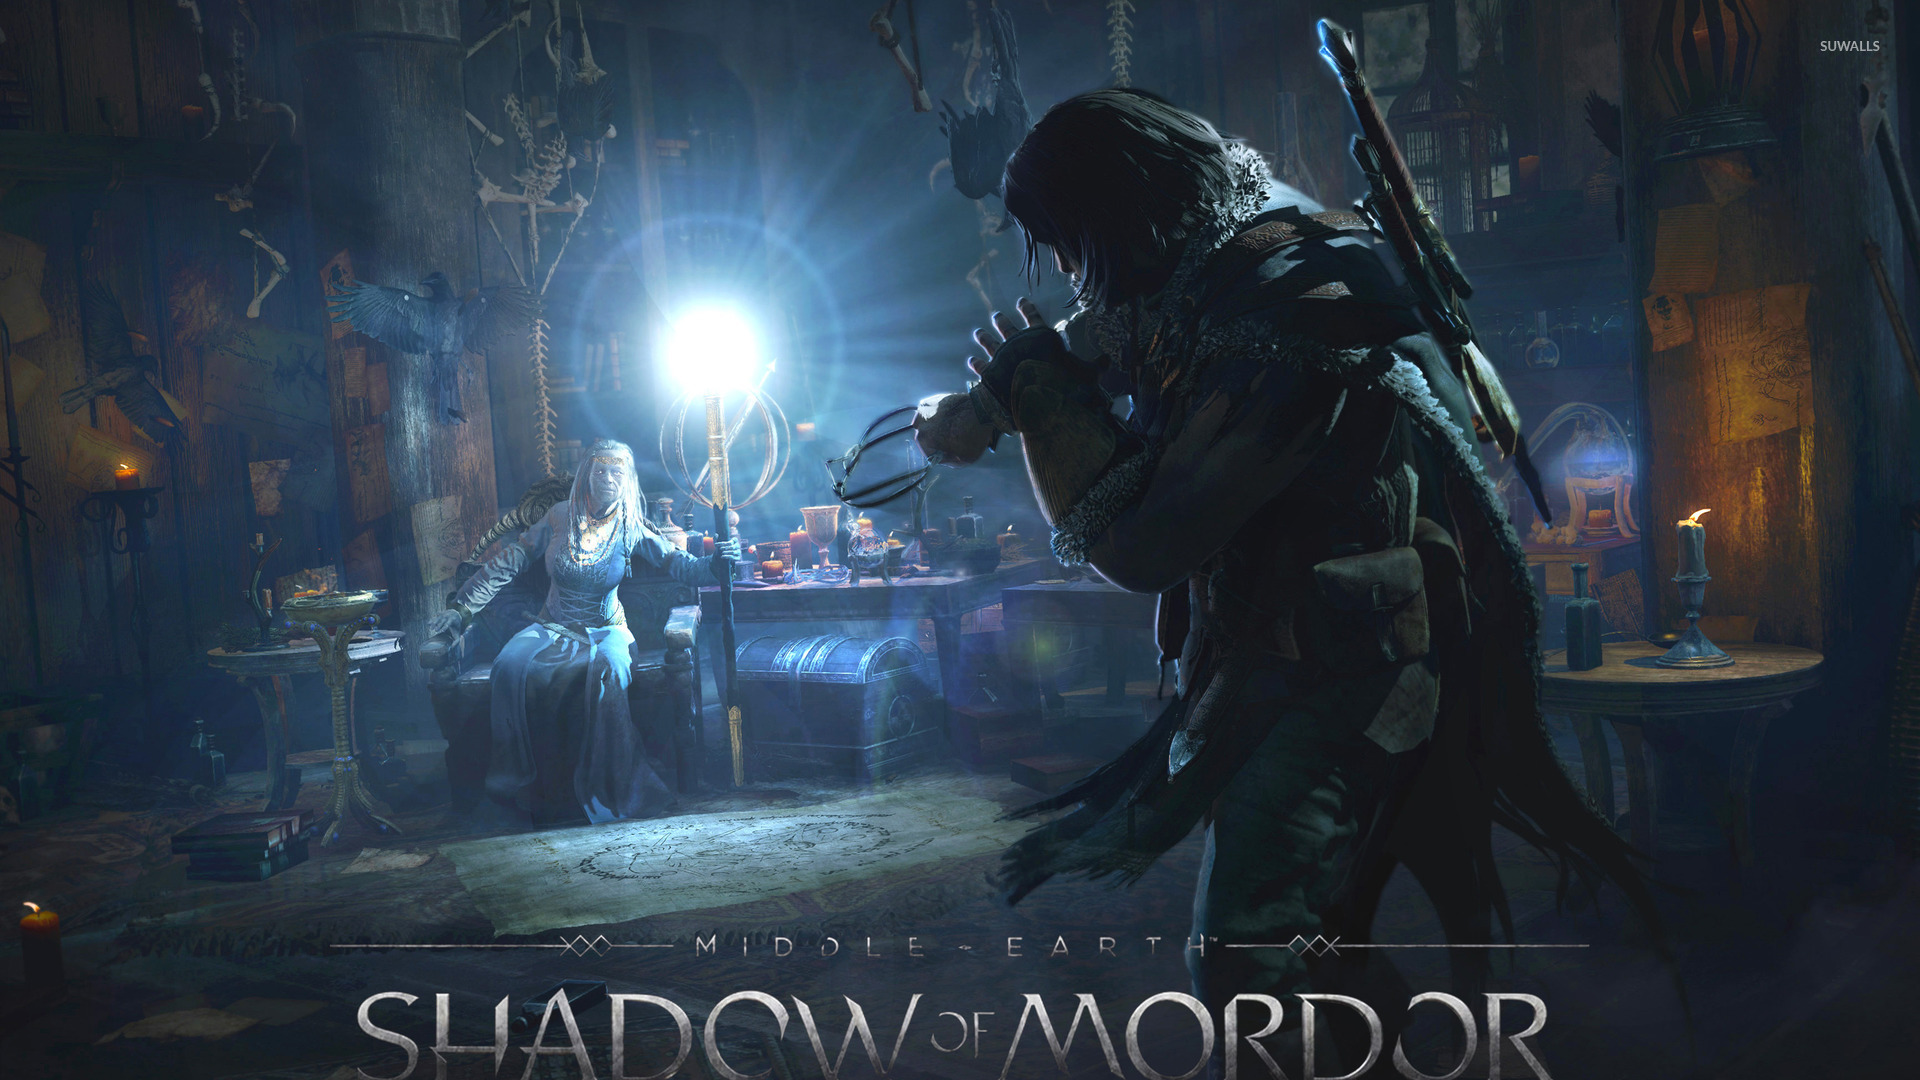 Middle earth Shadow of Mordor wallpaper   Game wallpapers